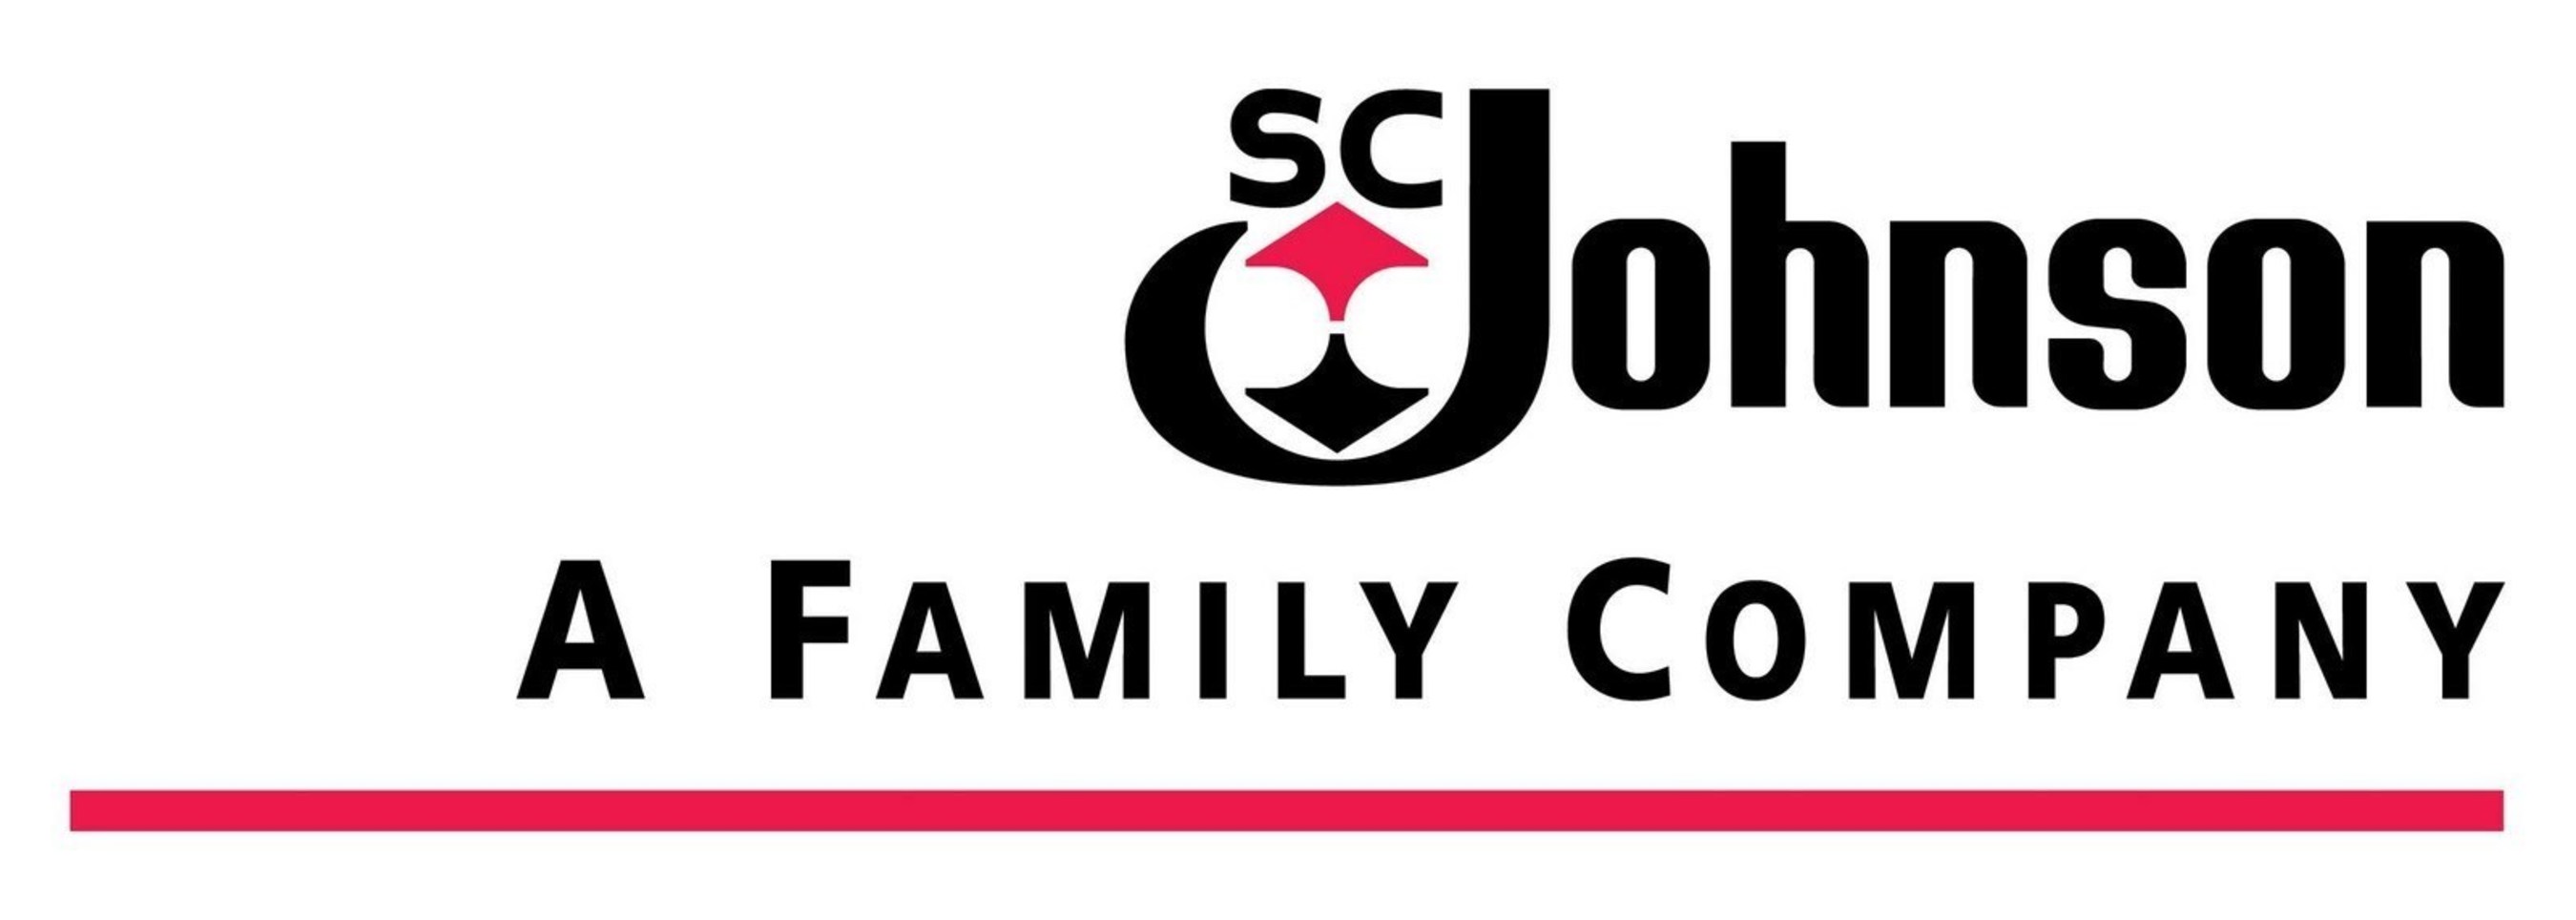 SC Johnson is a family company dedicated to innovative, high-quality products, excellence in the workplace and a long-term commitment to the environment and the communities in which it operates.